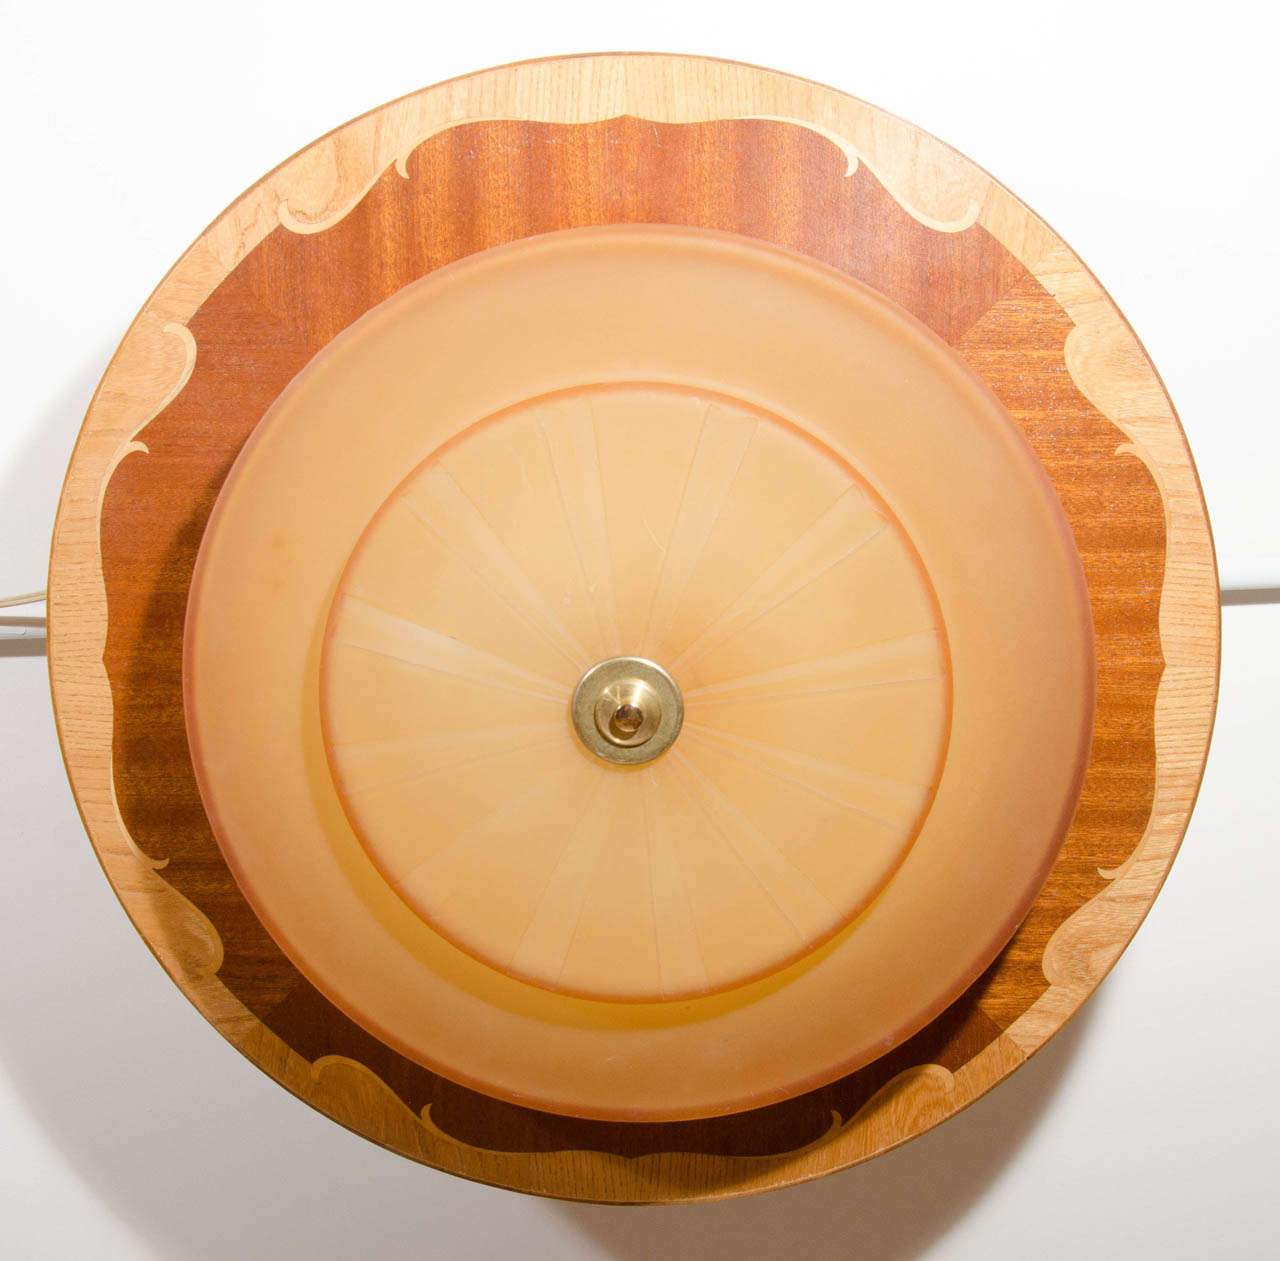 Flush mounted, this light features a stepped, frosted and etched golden-toned glass shade protruding from a Mjolby Intarsia disc, artistically inlaid with mahogany, birch and ash veneers.